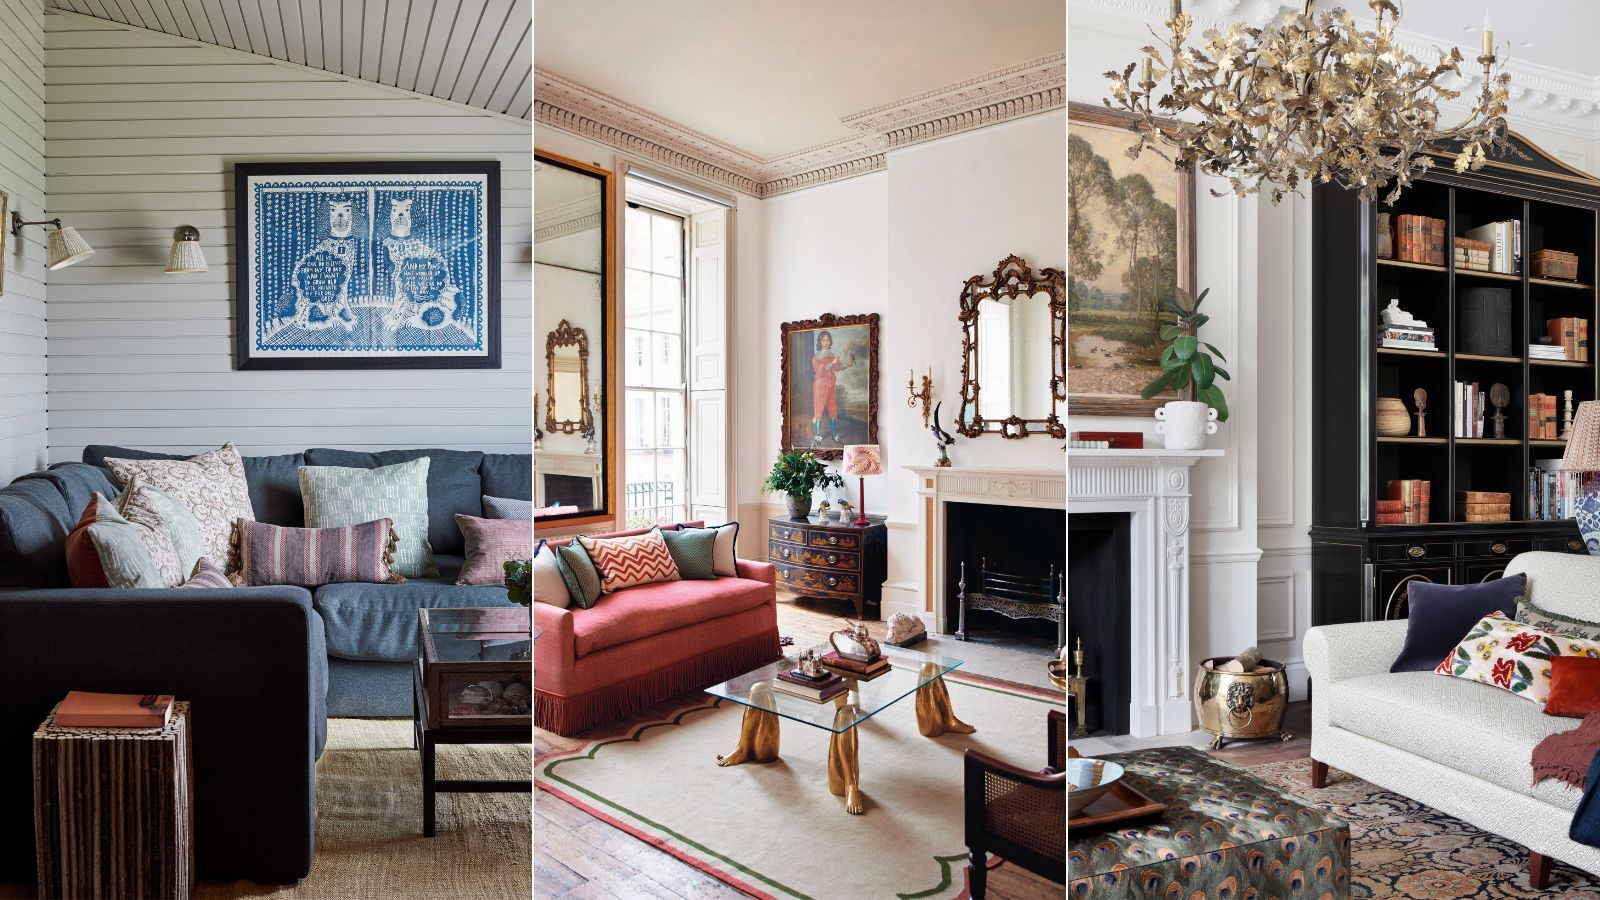 How to warm up a white living room: 5 ways to soften a scheme